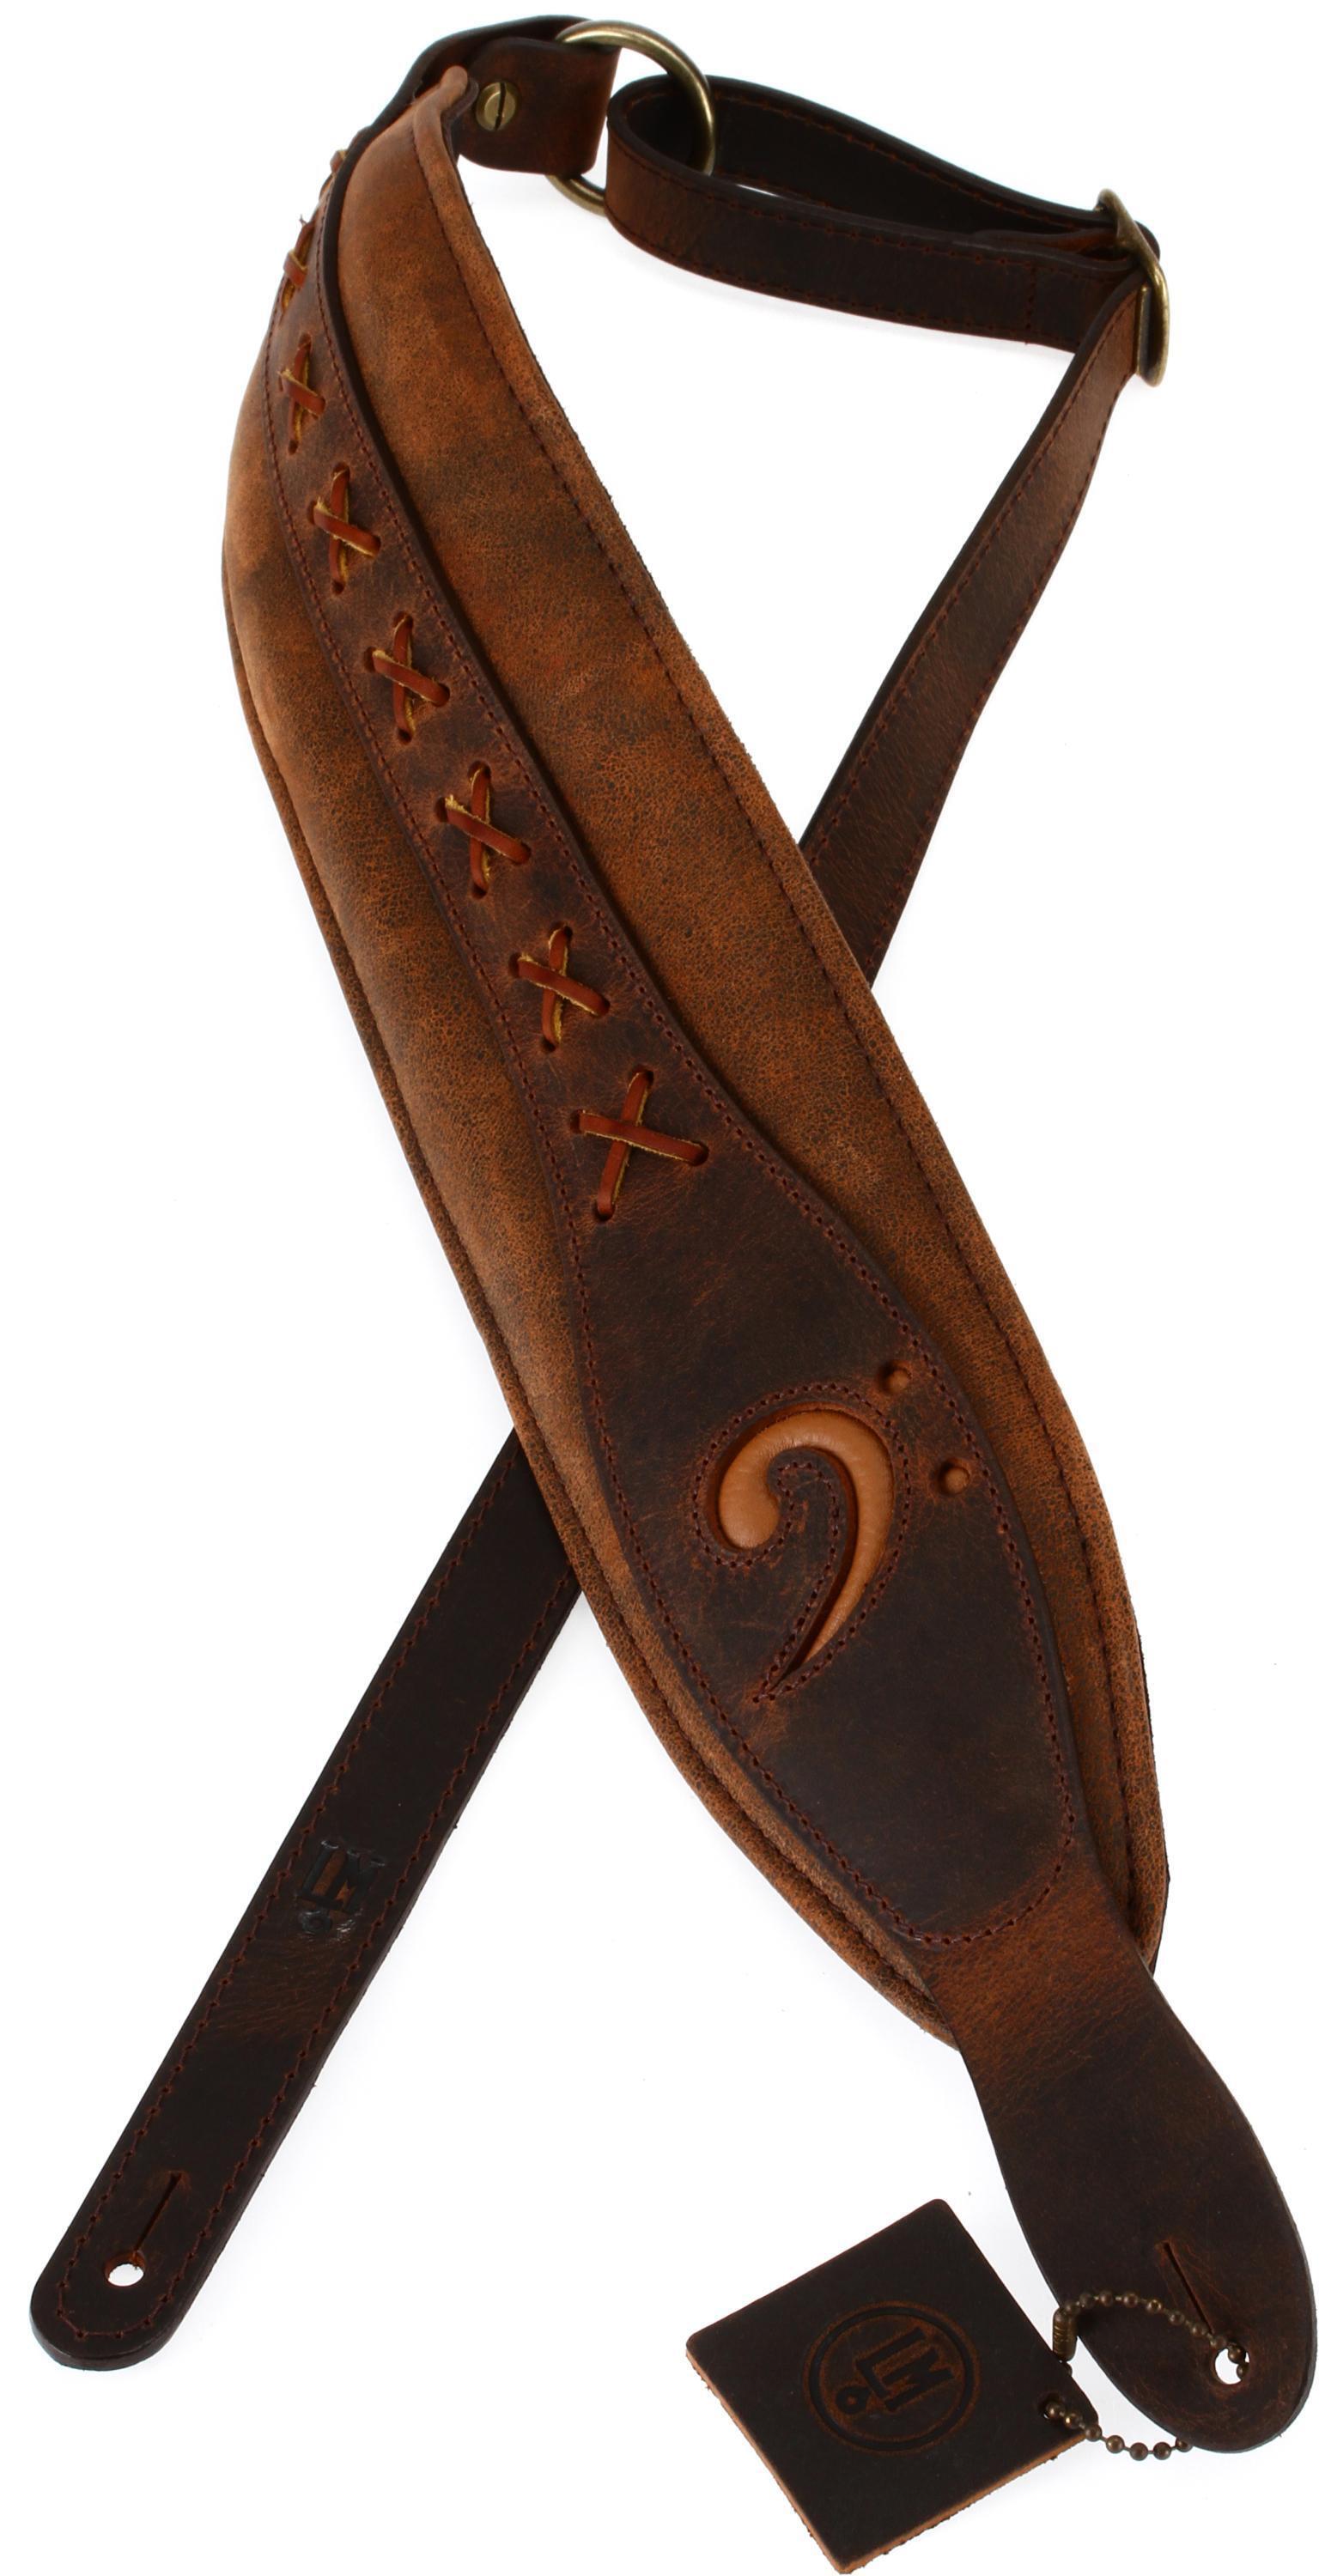 LM Products X-CLEF Ropemaker Edition Bass Strap - Brown